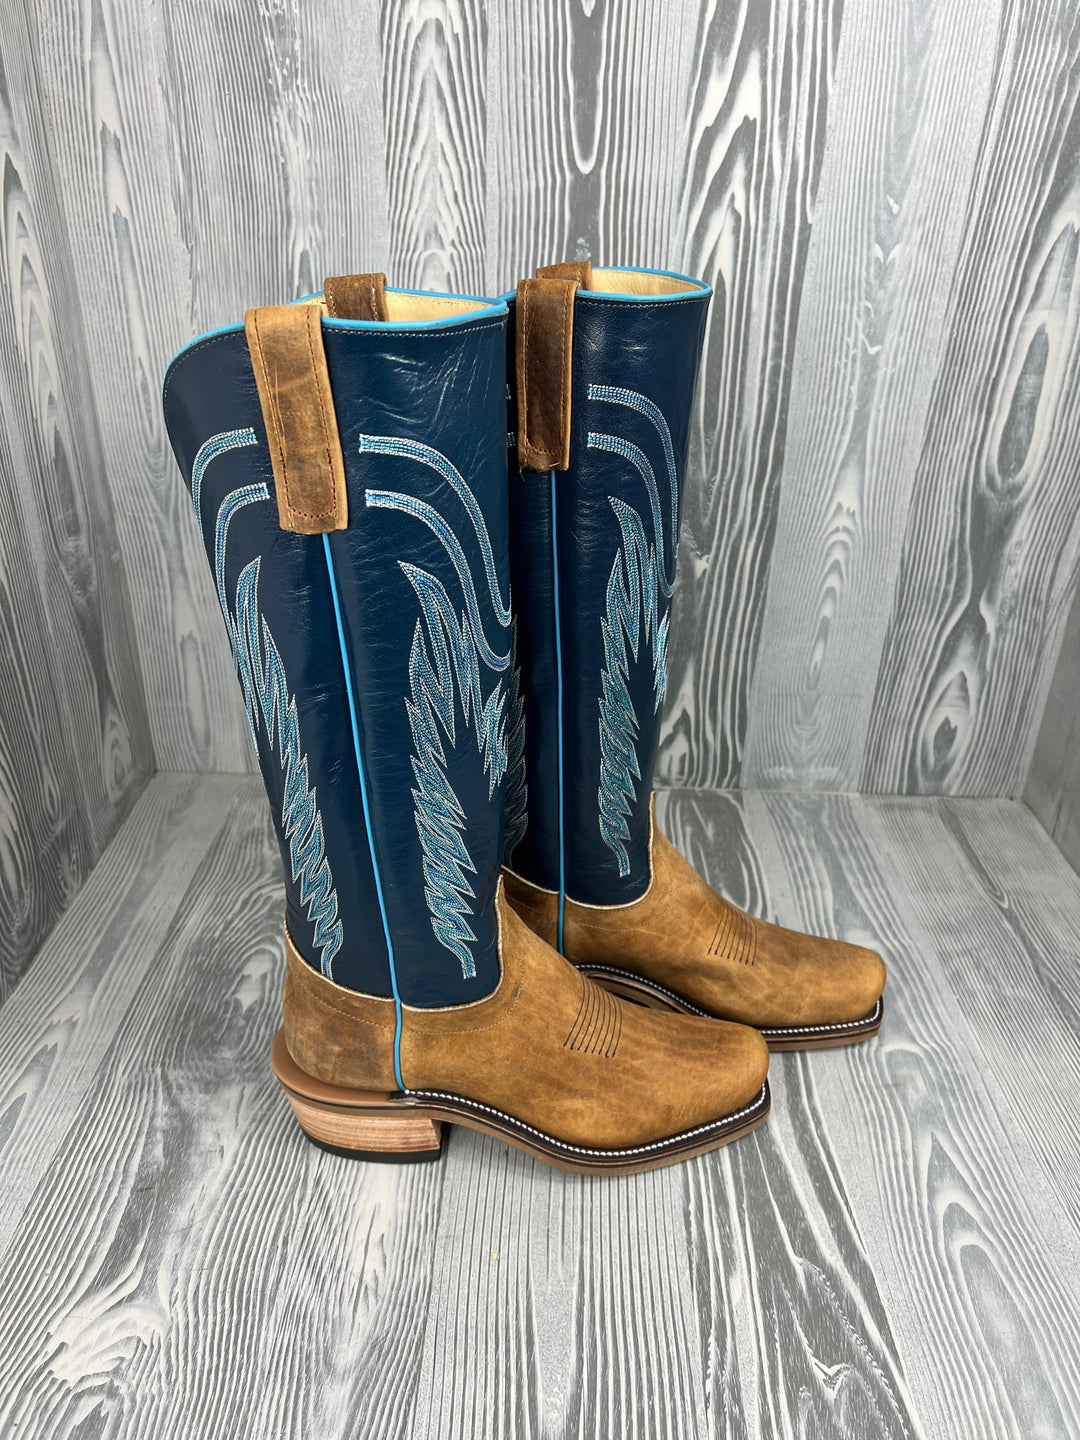 Men's Olathe Distressed American Bison with 15" Blue Glazed Buffalo Tops